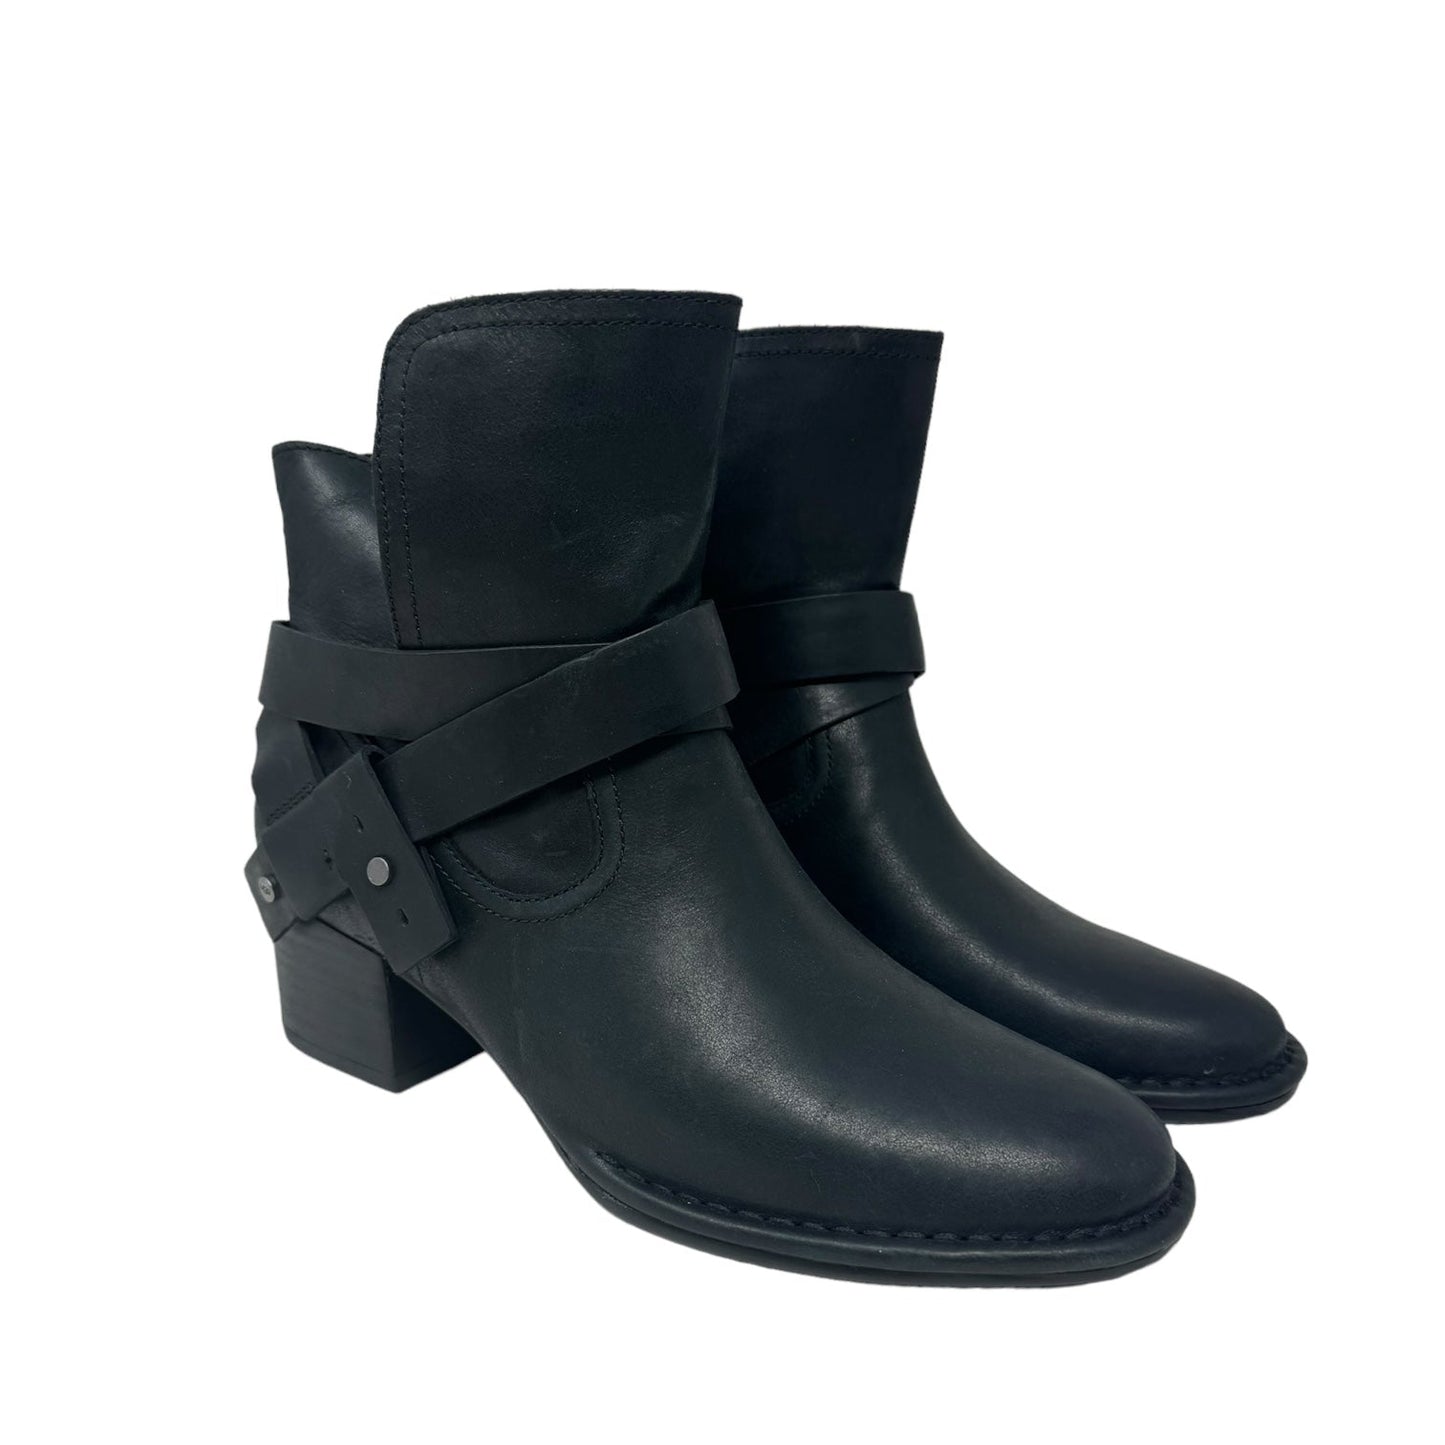 Elysian Leather Boots By Ugg  Size: 8